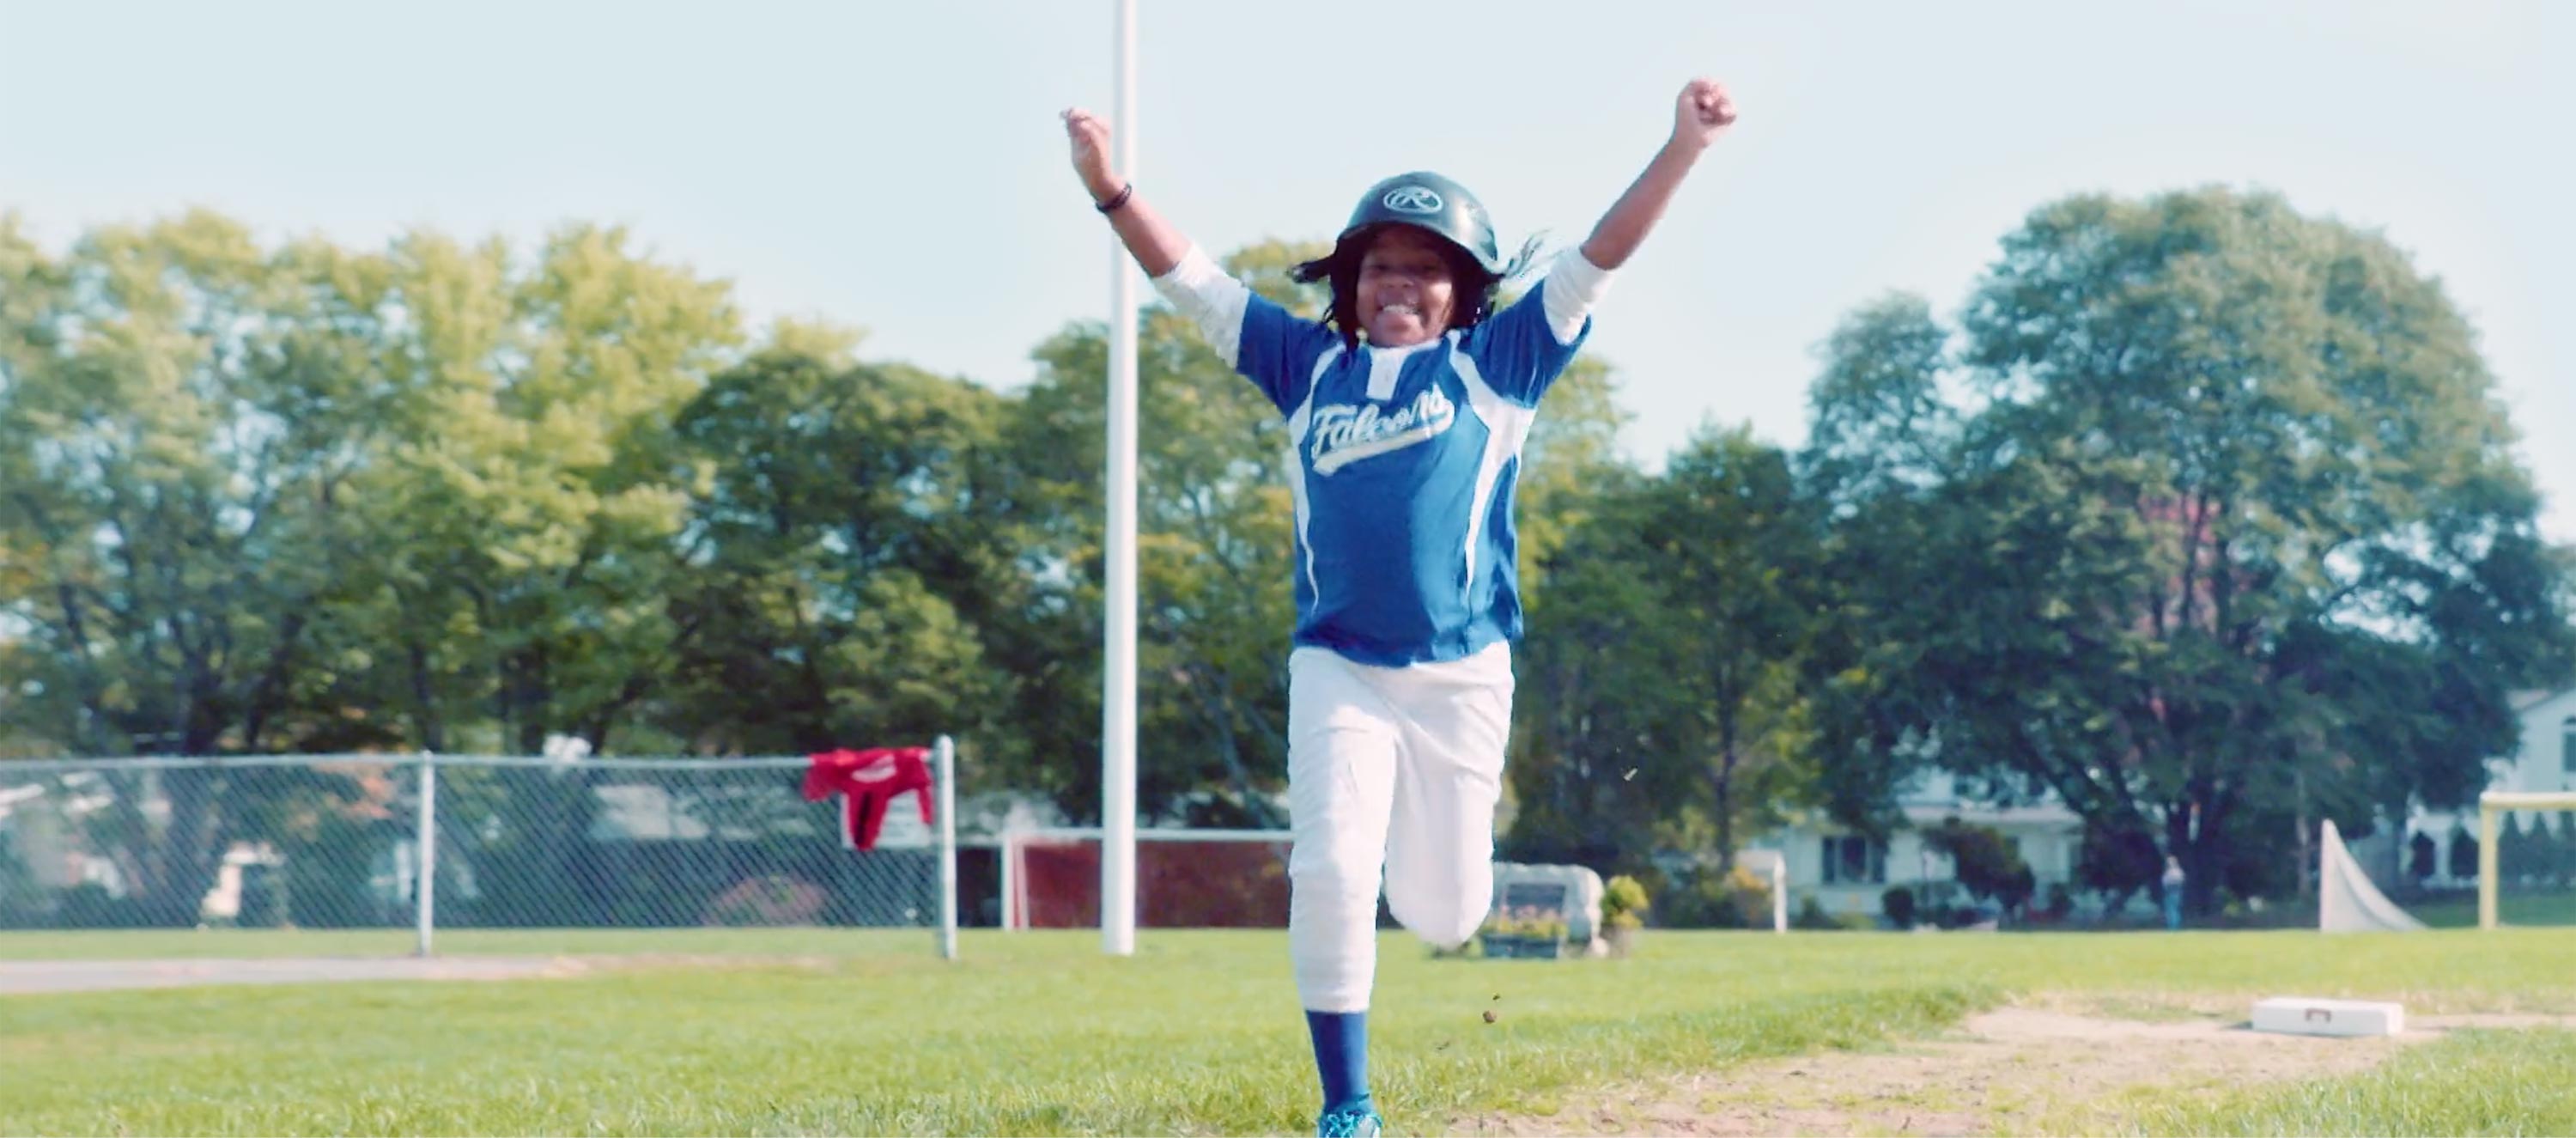 Good Sports "Why Sports?" video still shot of child running bases with hands raised